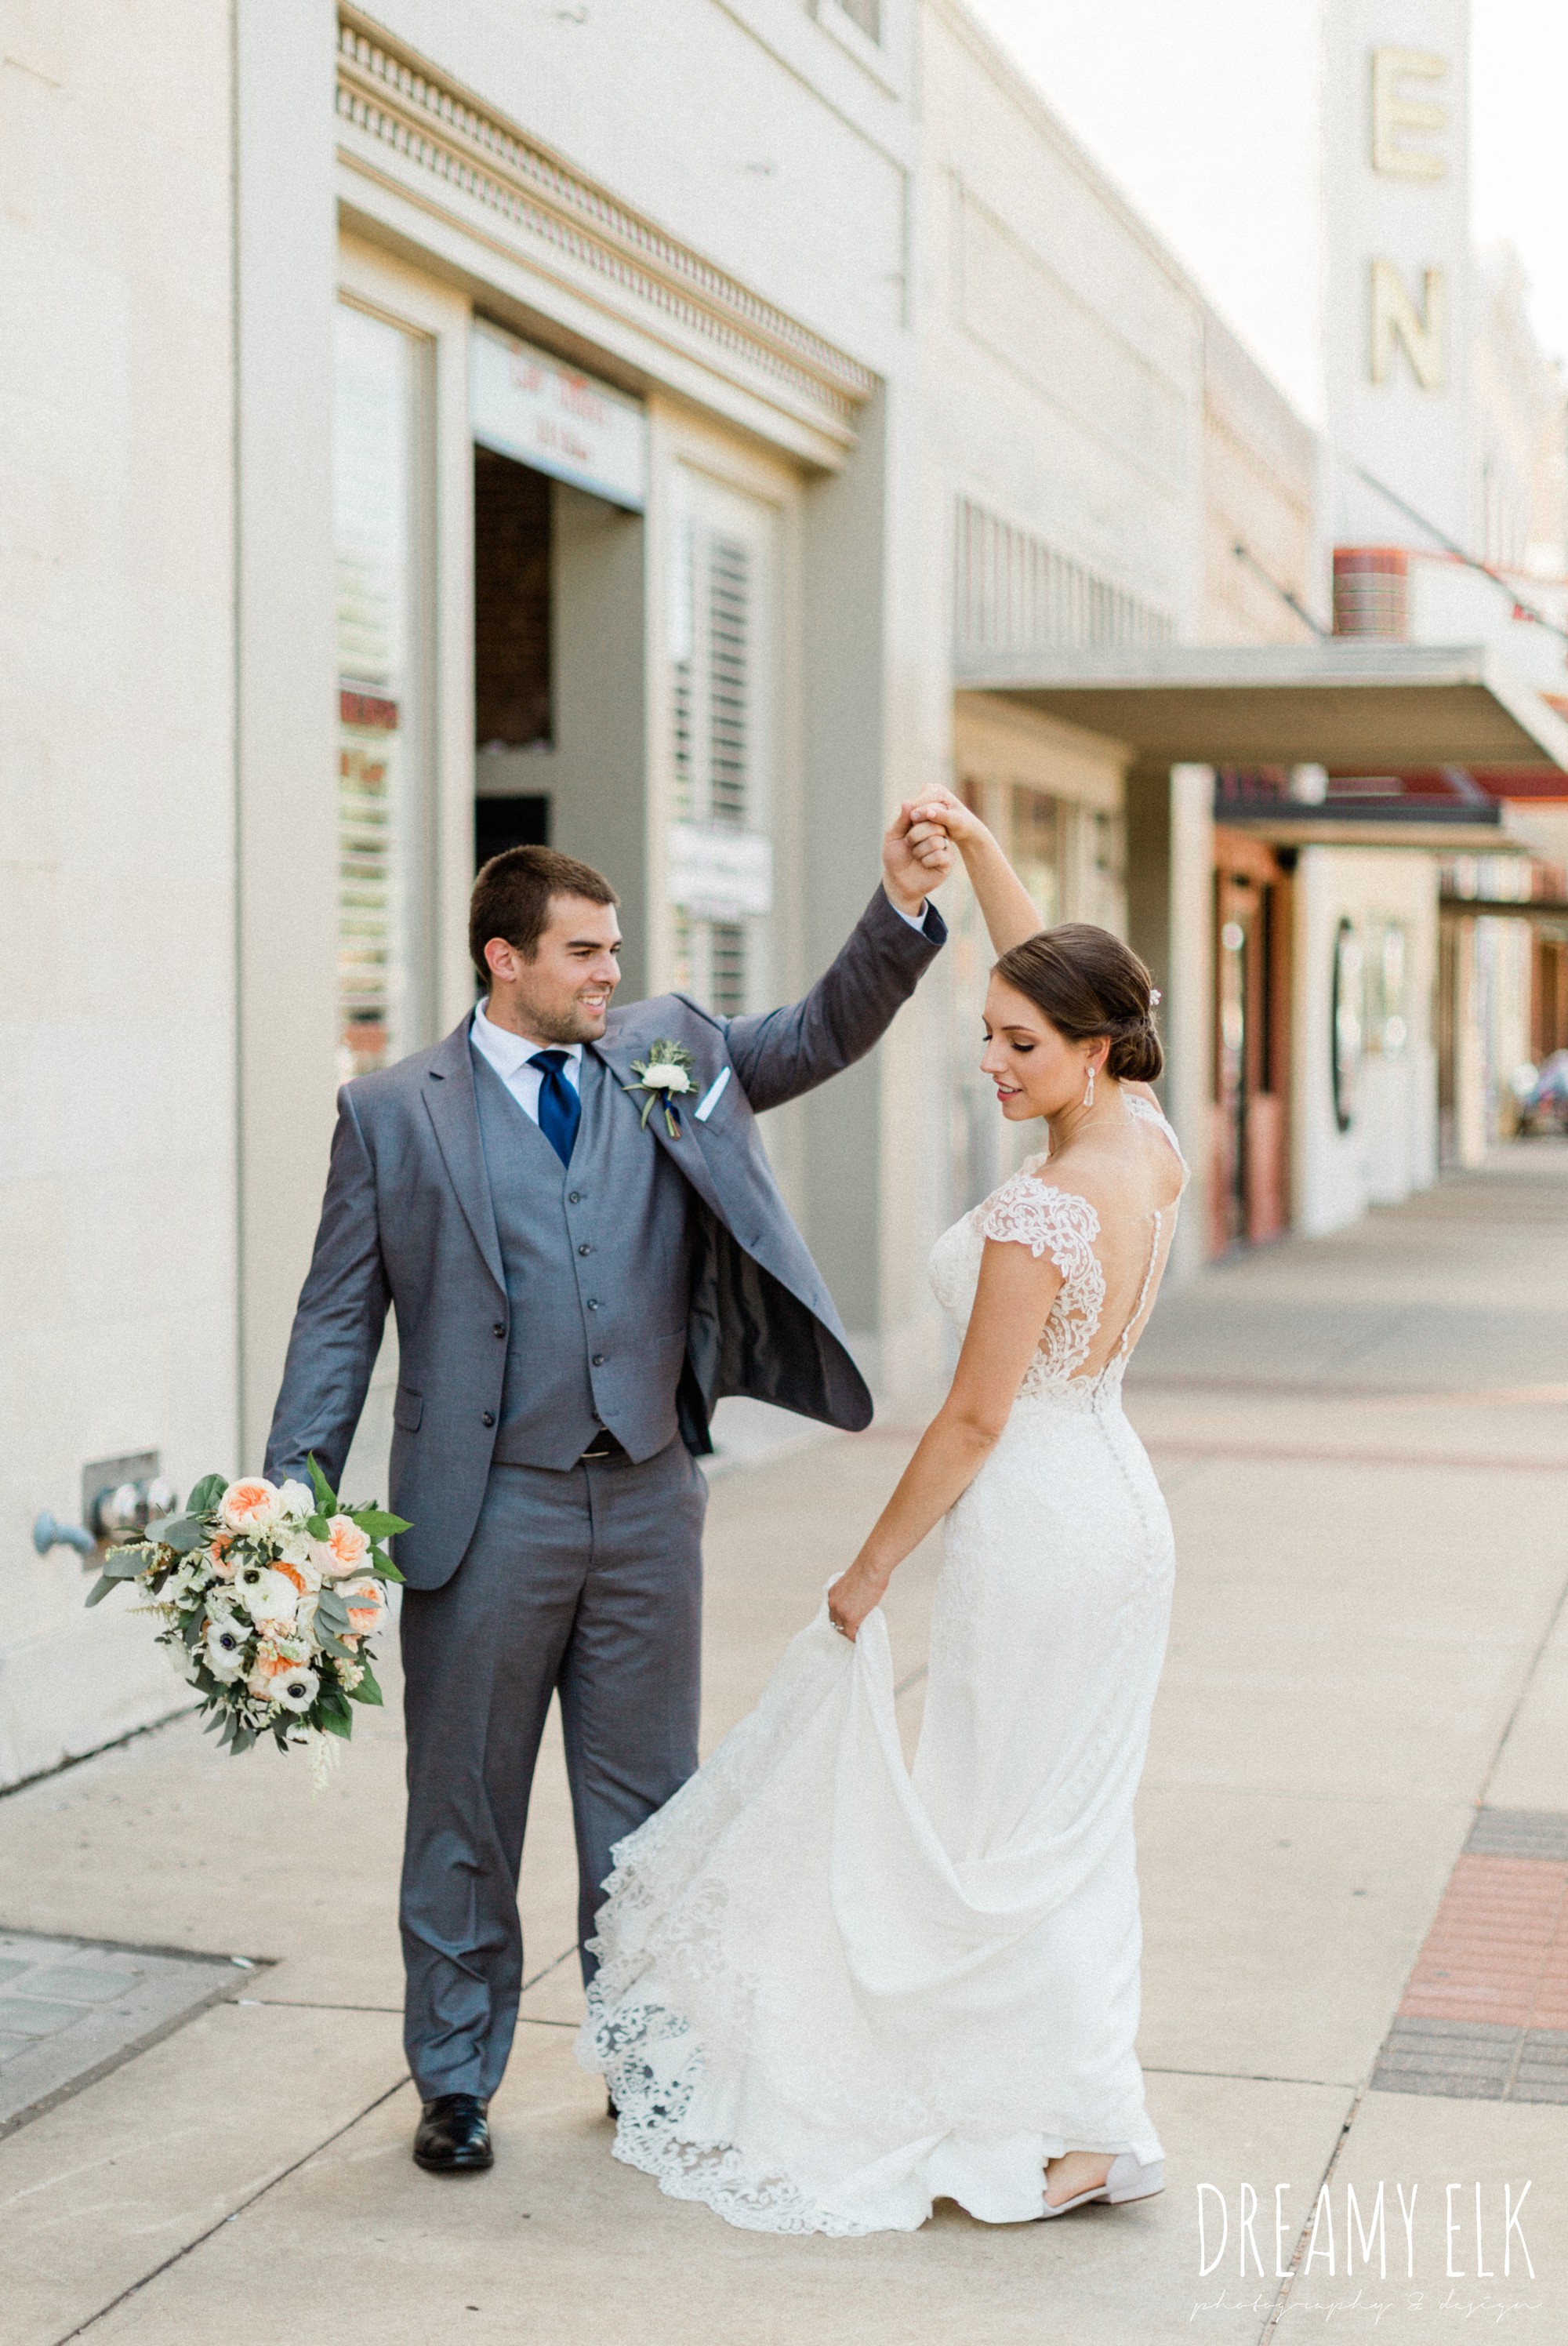 gray suit, navy tie, bride and groom, essense of australia column dress, unforgettable floral, spring wedding photo college station texas, dreamy elk photography and design